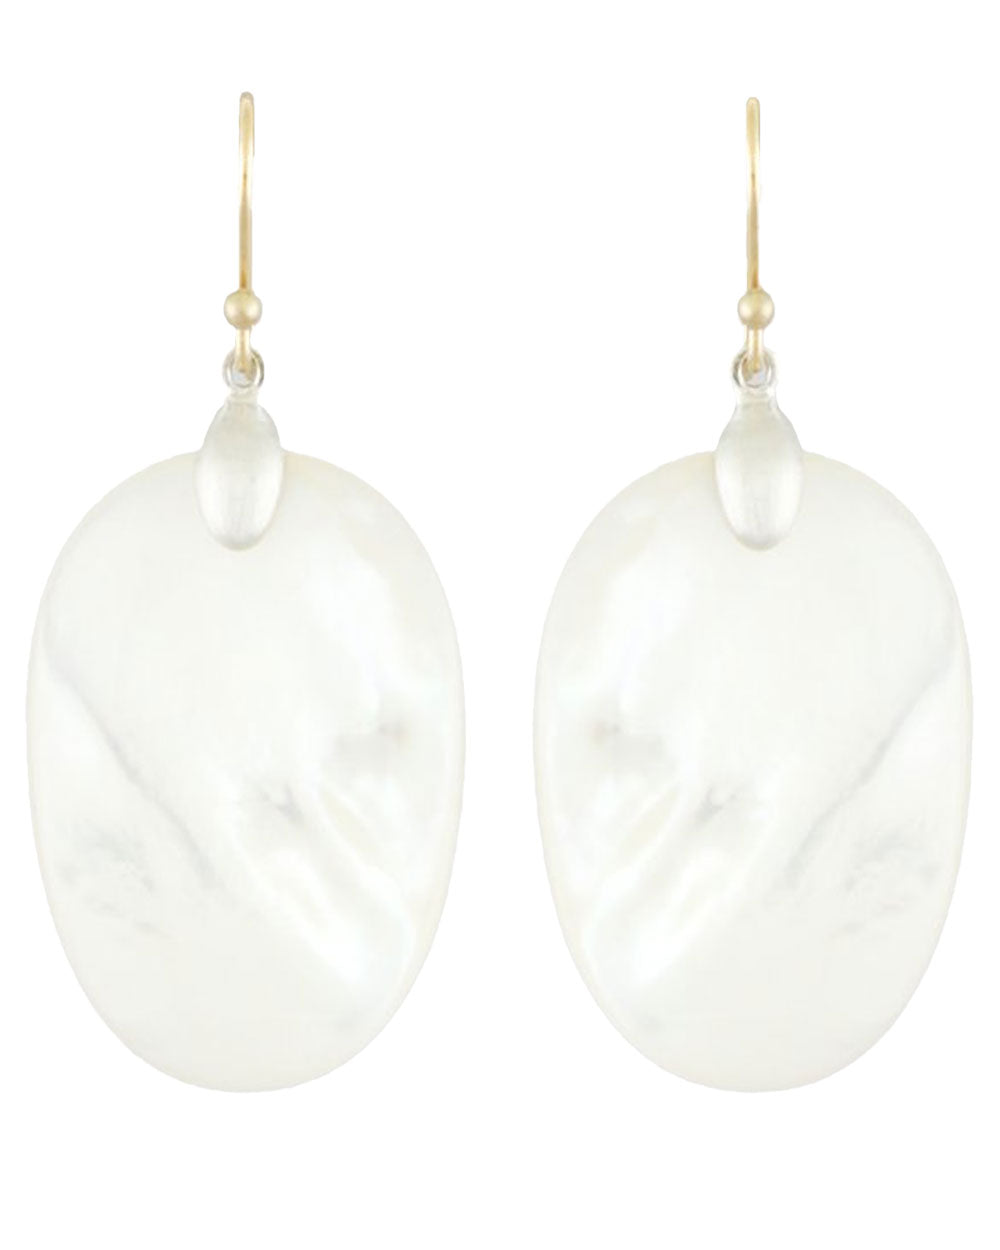 Silver Mother of Pearl Large Chip Earrings